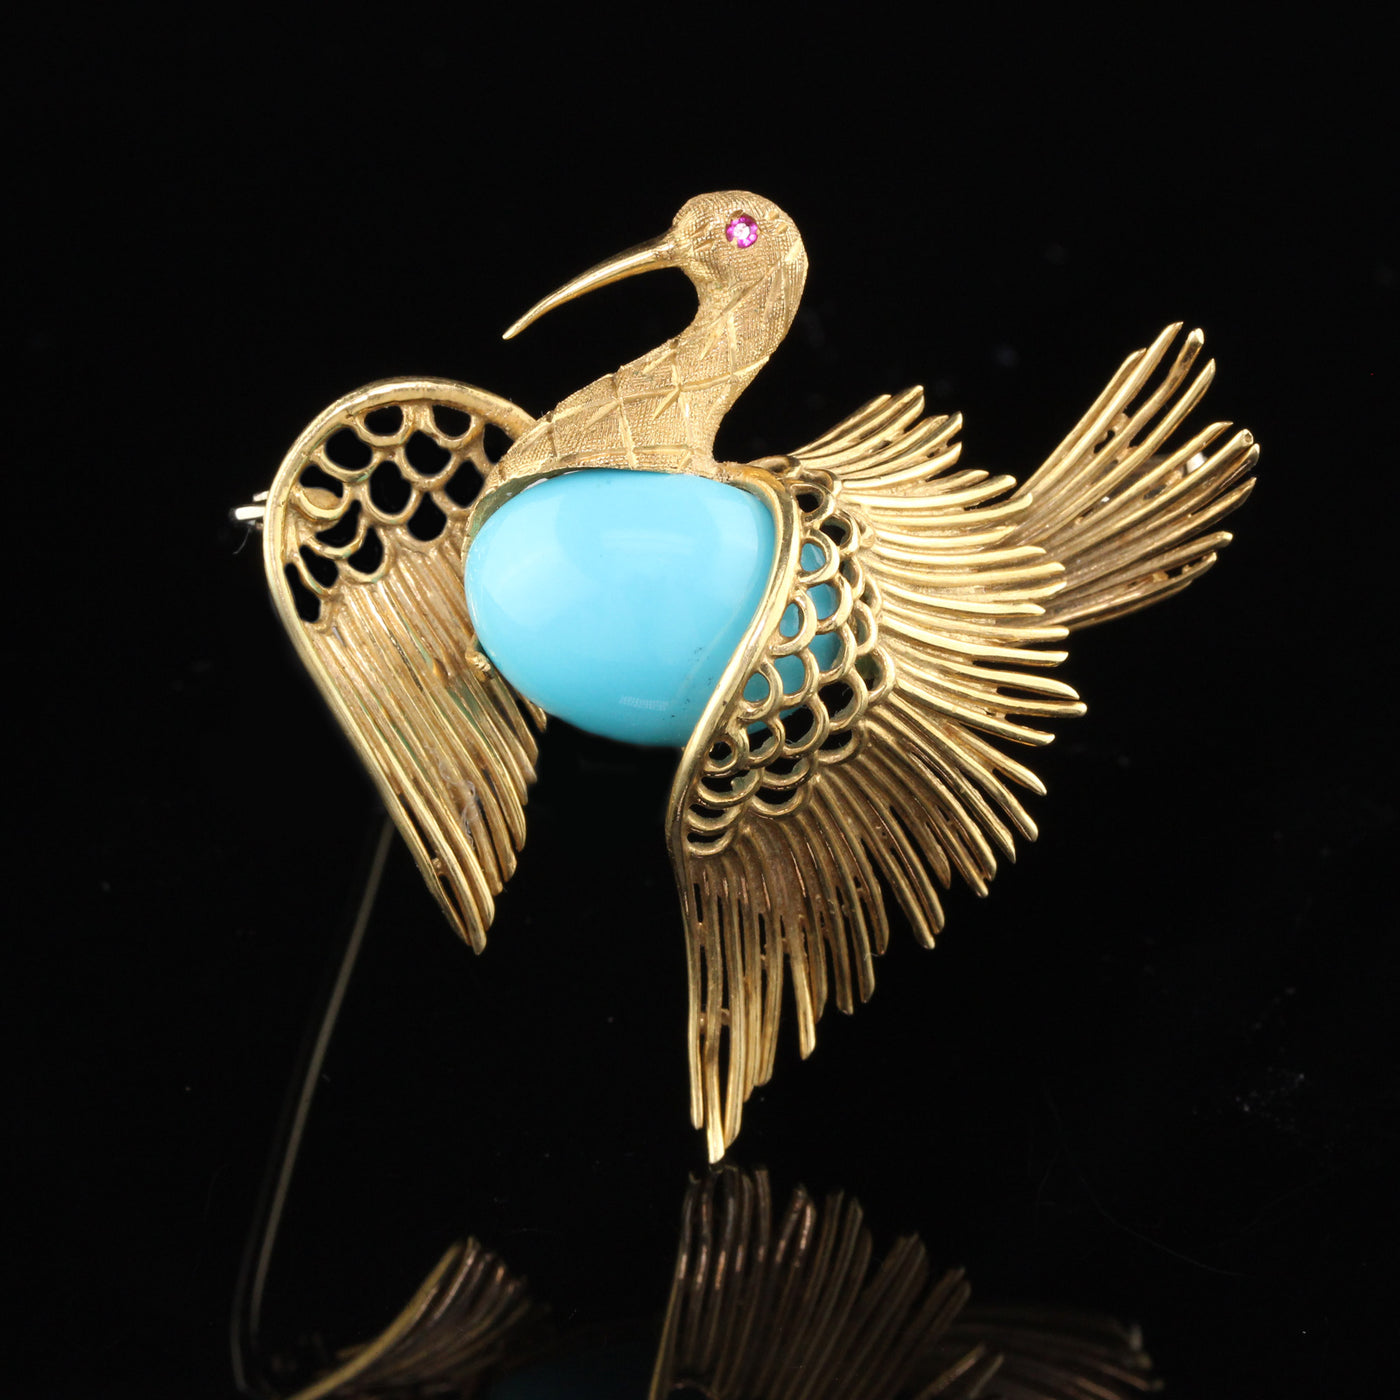 Vintage Estate 18K Yellow Gold & Turquoise Swan Brooch